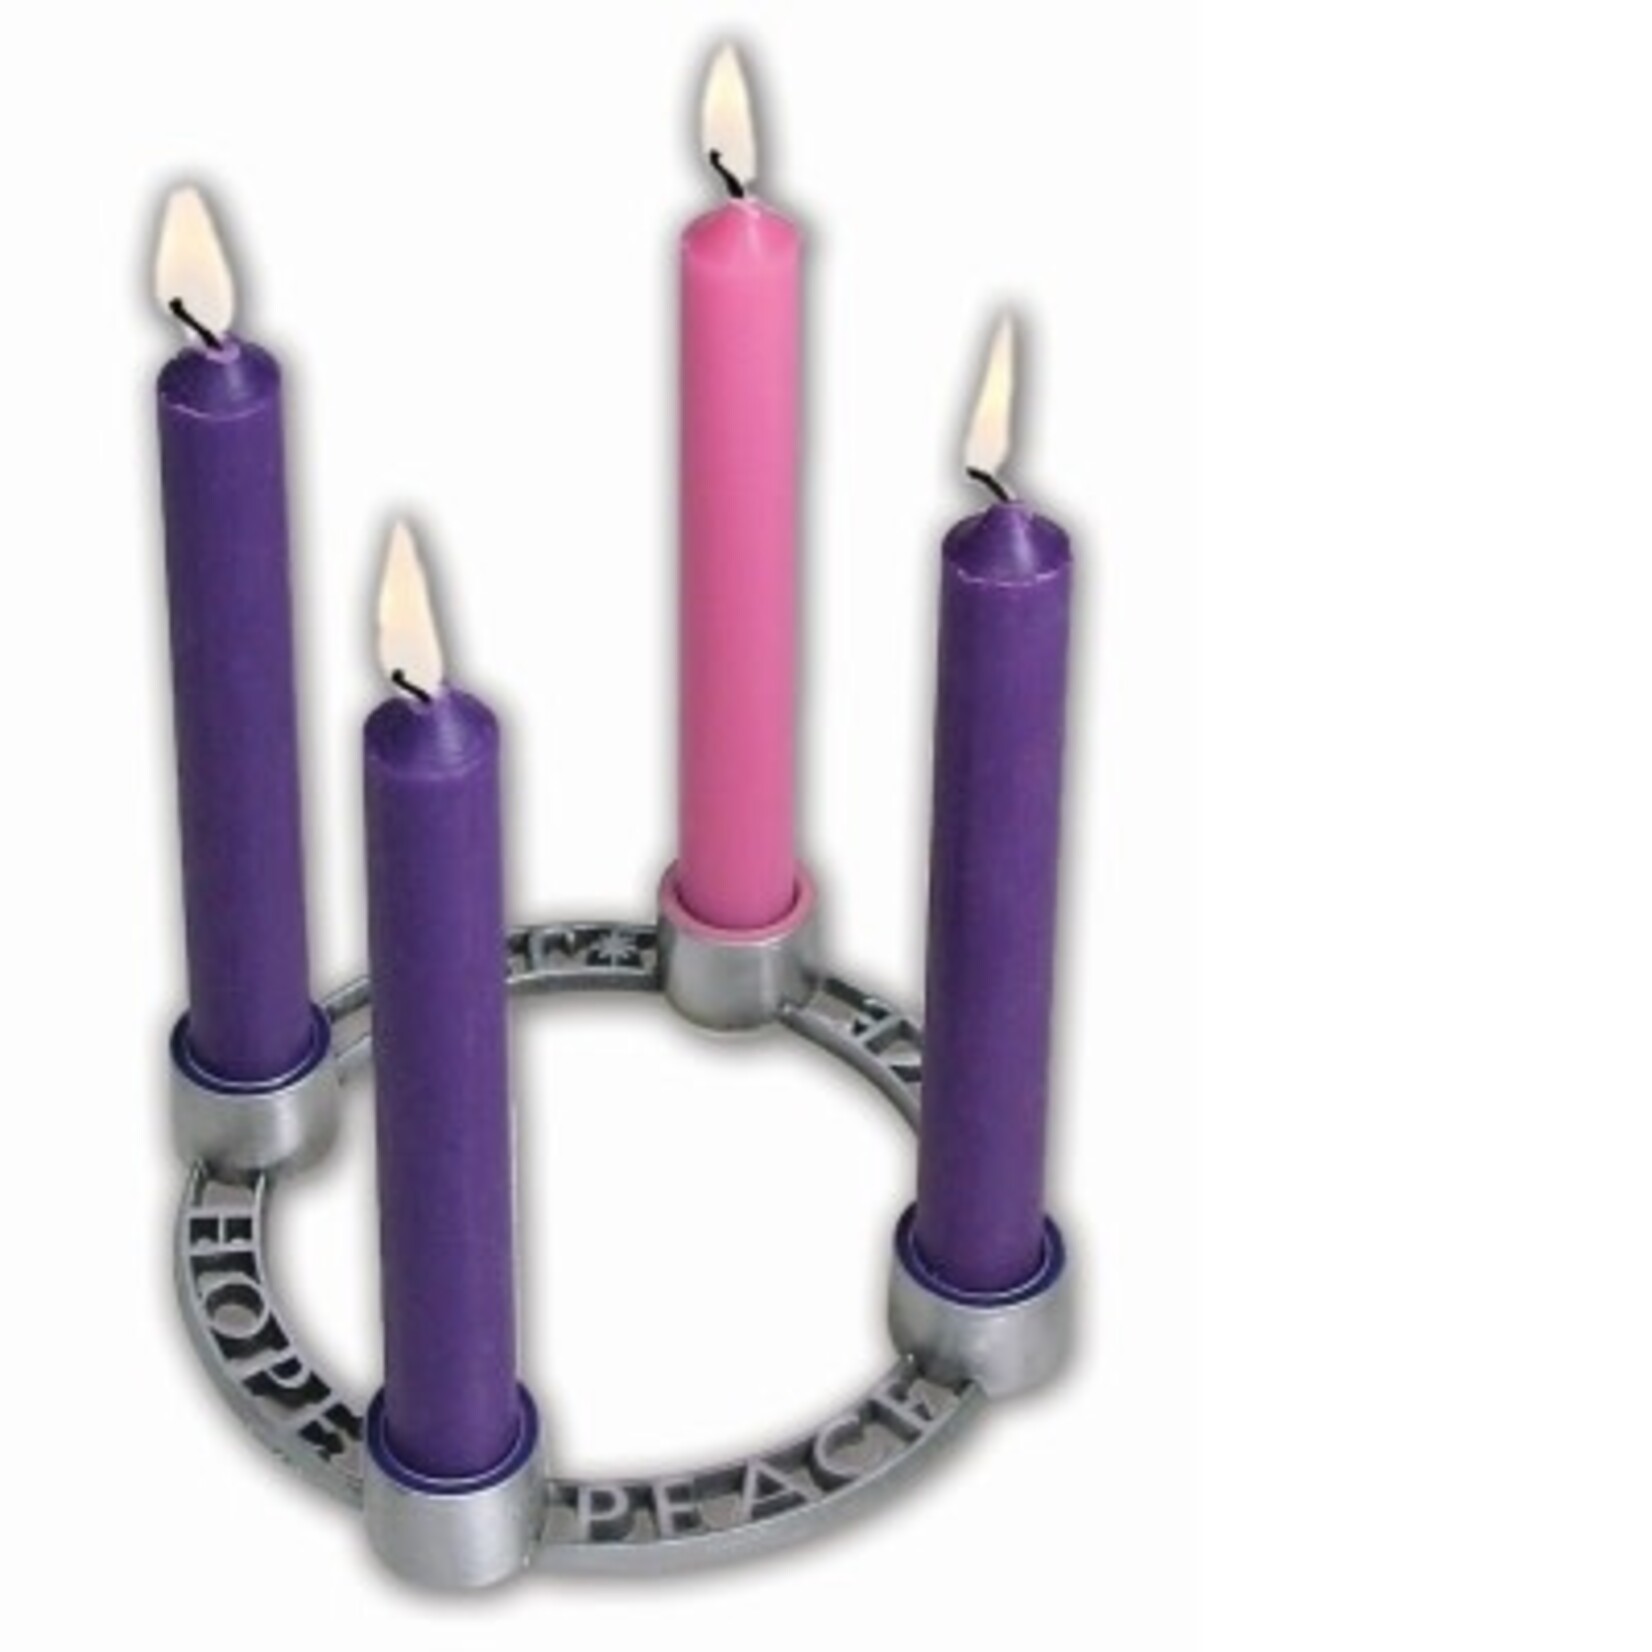 Mini Advent Wreath with Candles